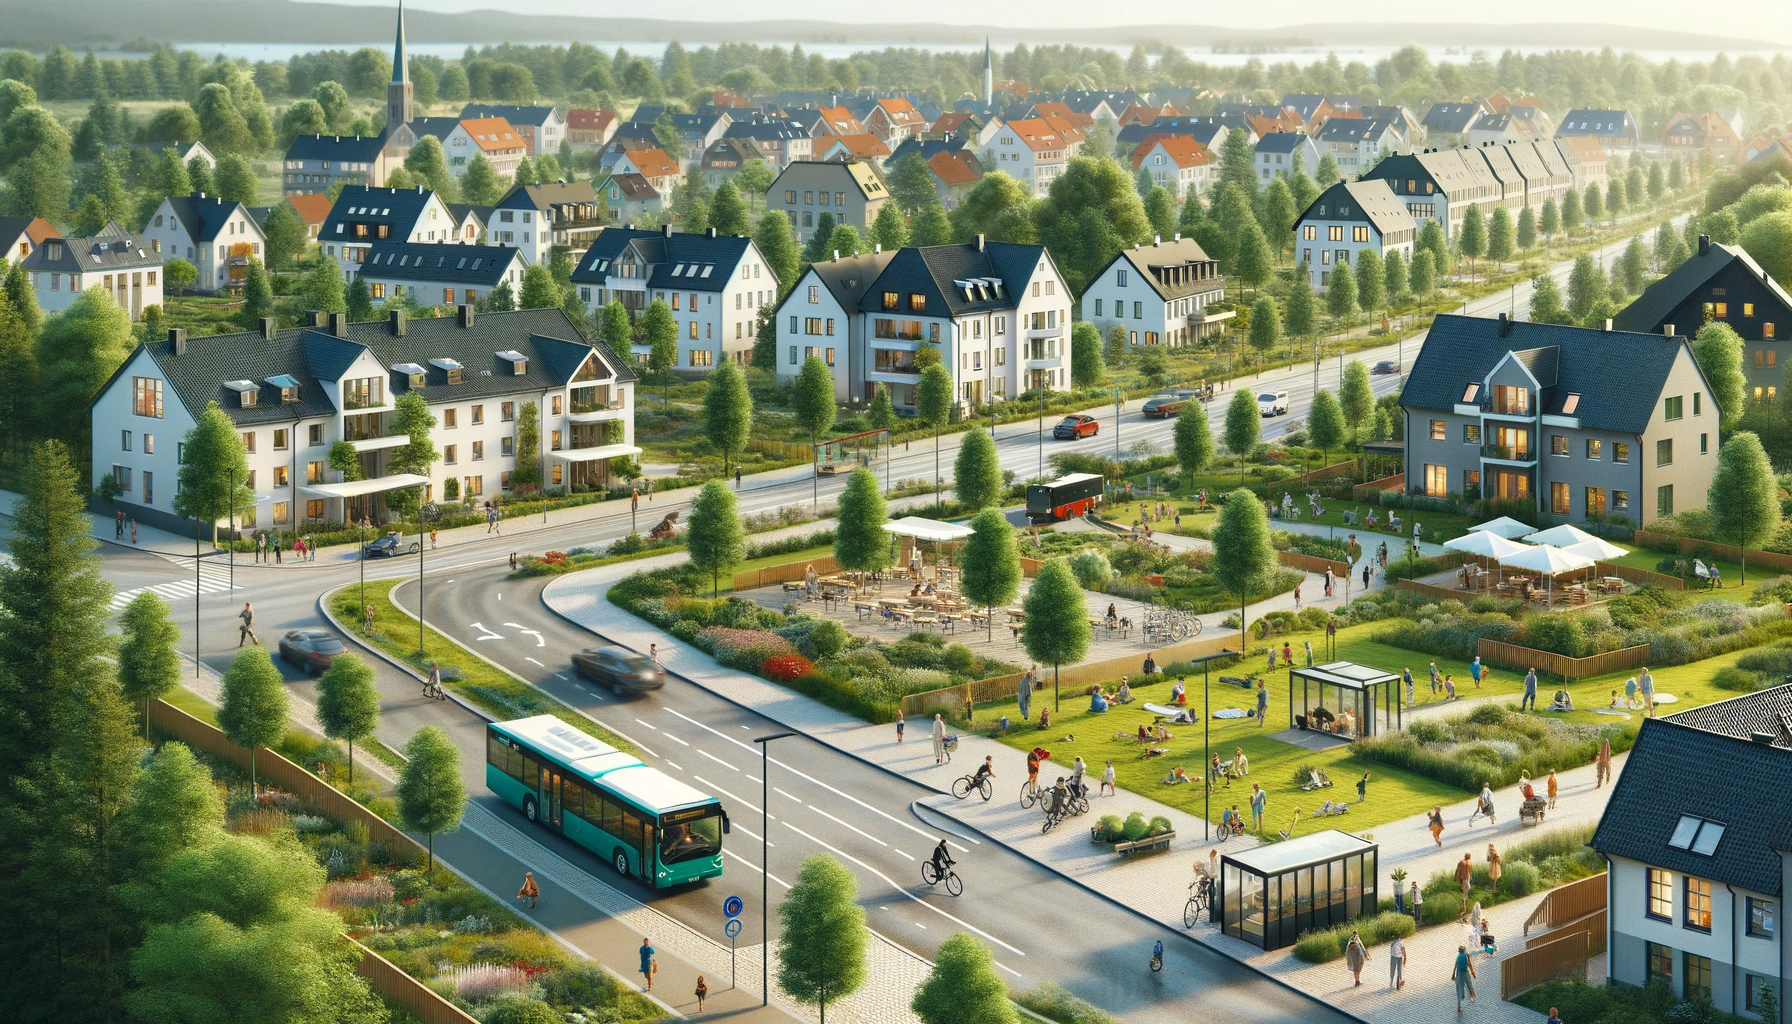 A picturesque Danish neighborhood showing a variety of residential houses, lush green parks, accessible public transport like buses and bicycles.